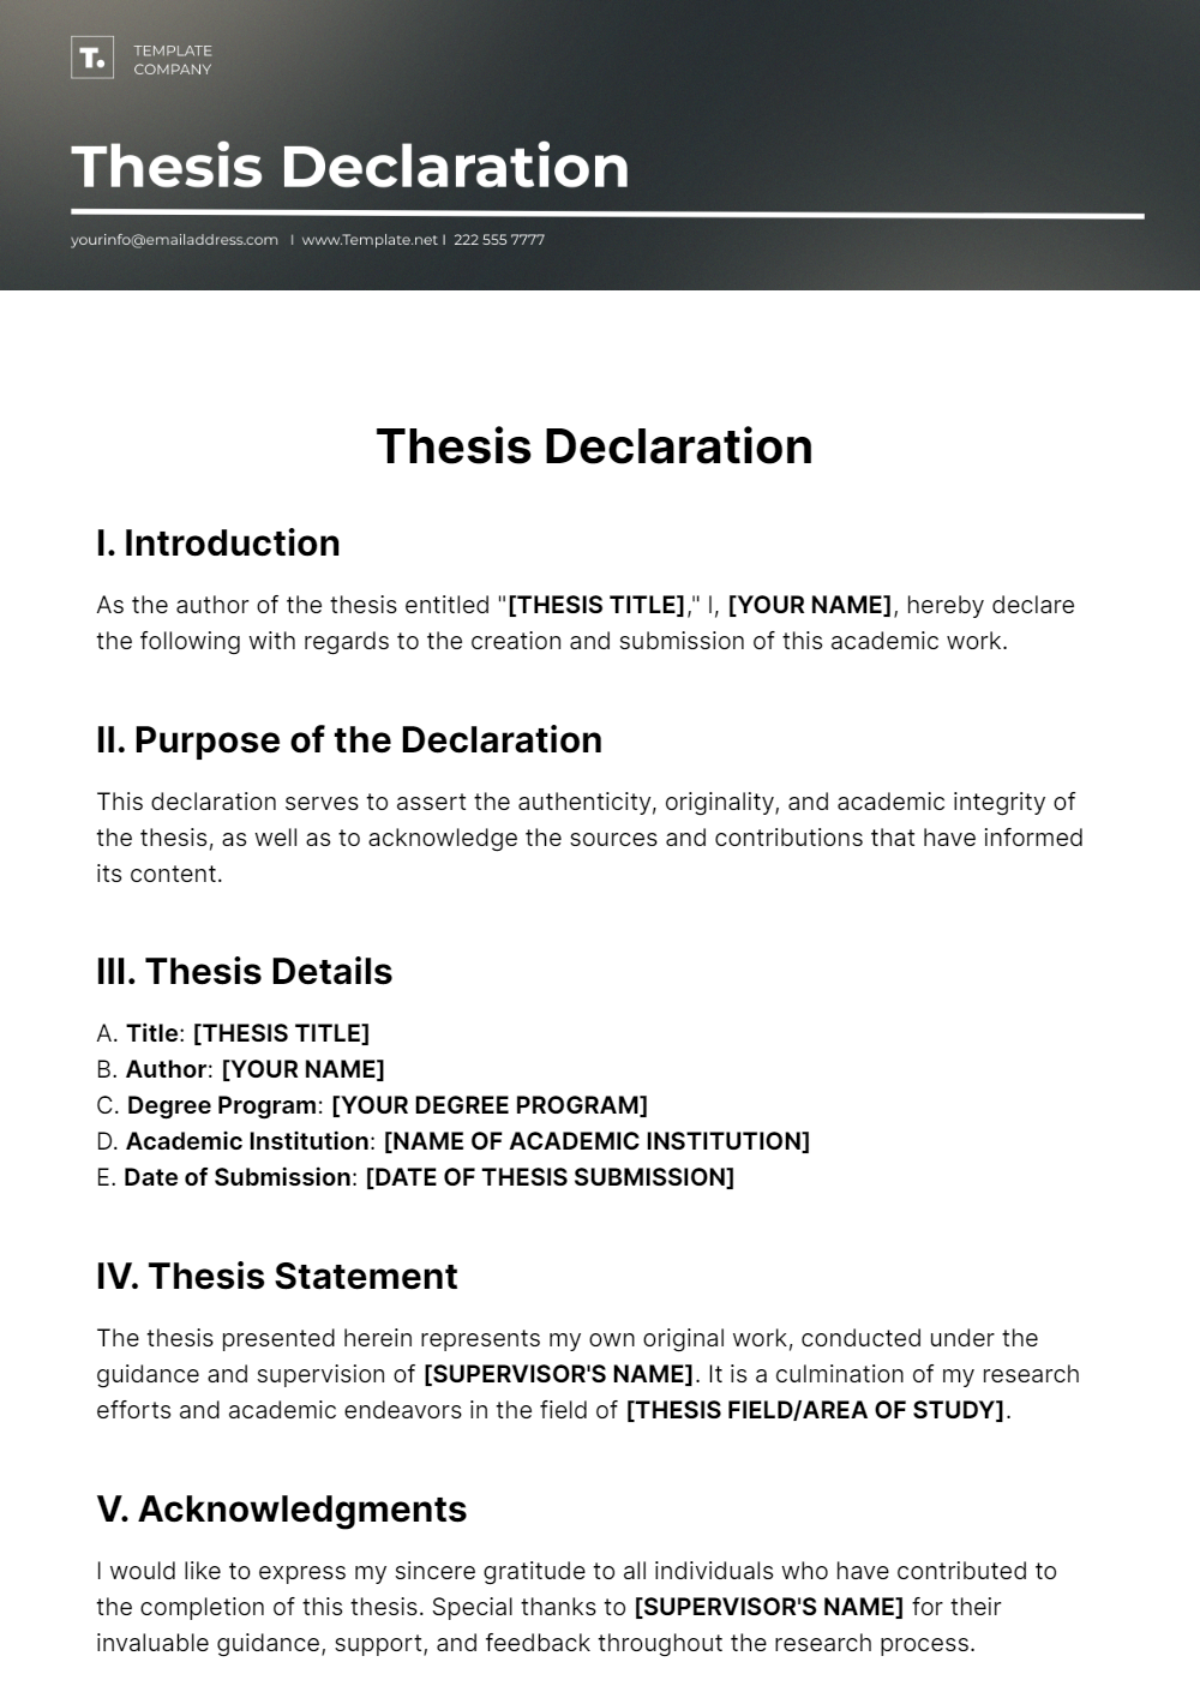 Thesis Declaration Template